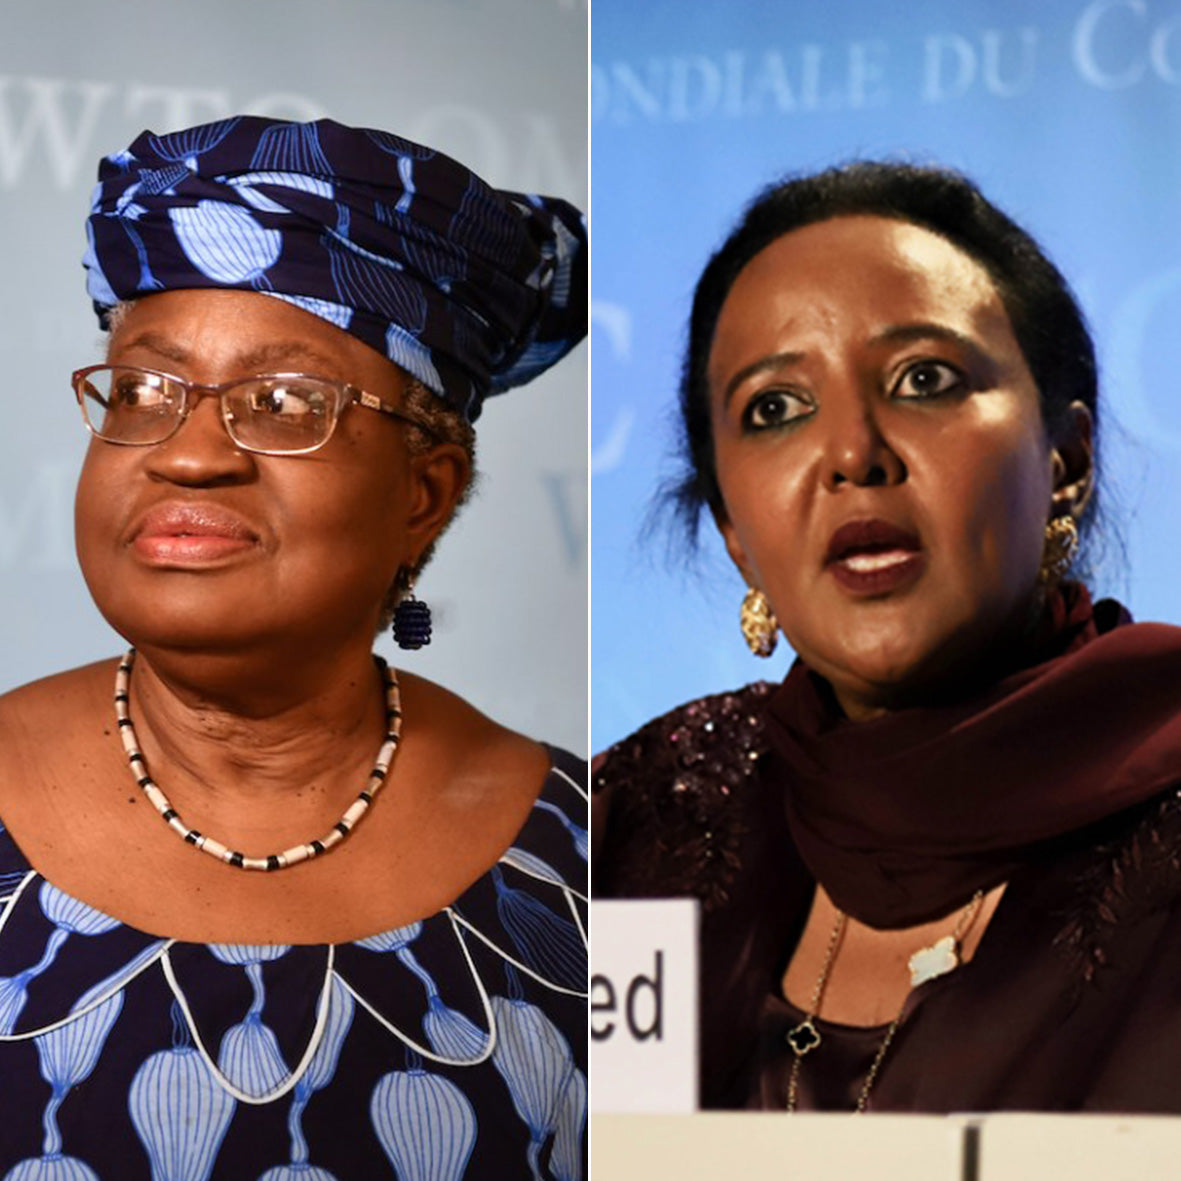 African Development: Two African Candidates Make WTO Final Five